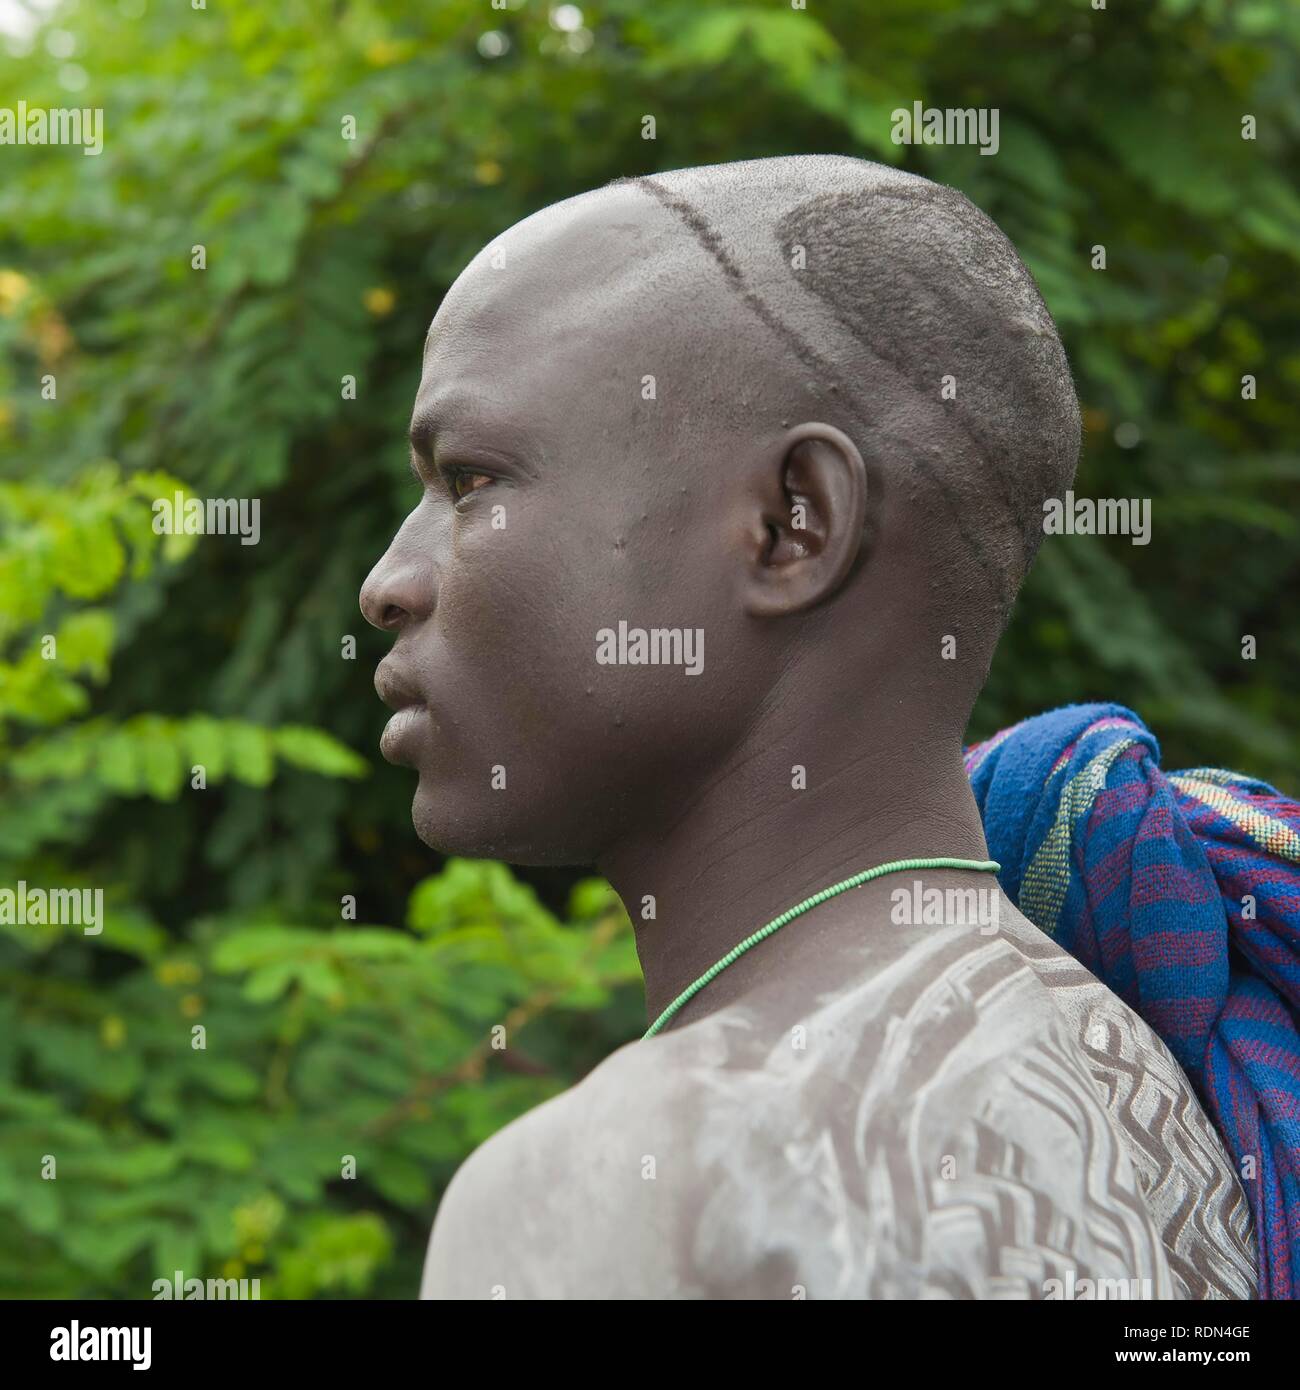 Surma man with body painting, Tulgit, Omo River Valley, Ethiopia, Africa Stock Photo